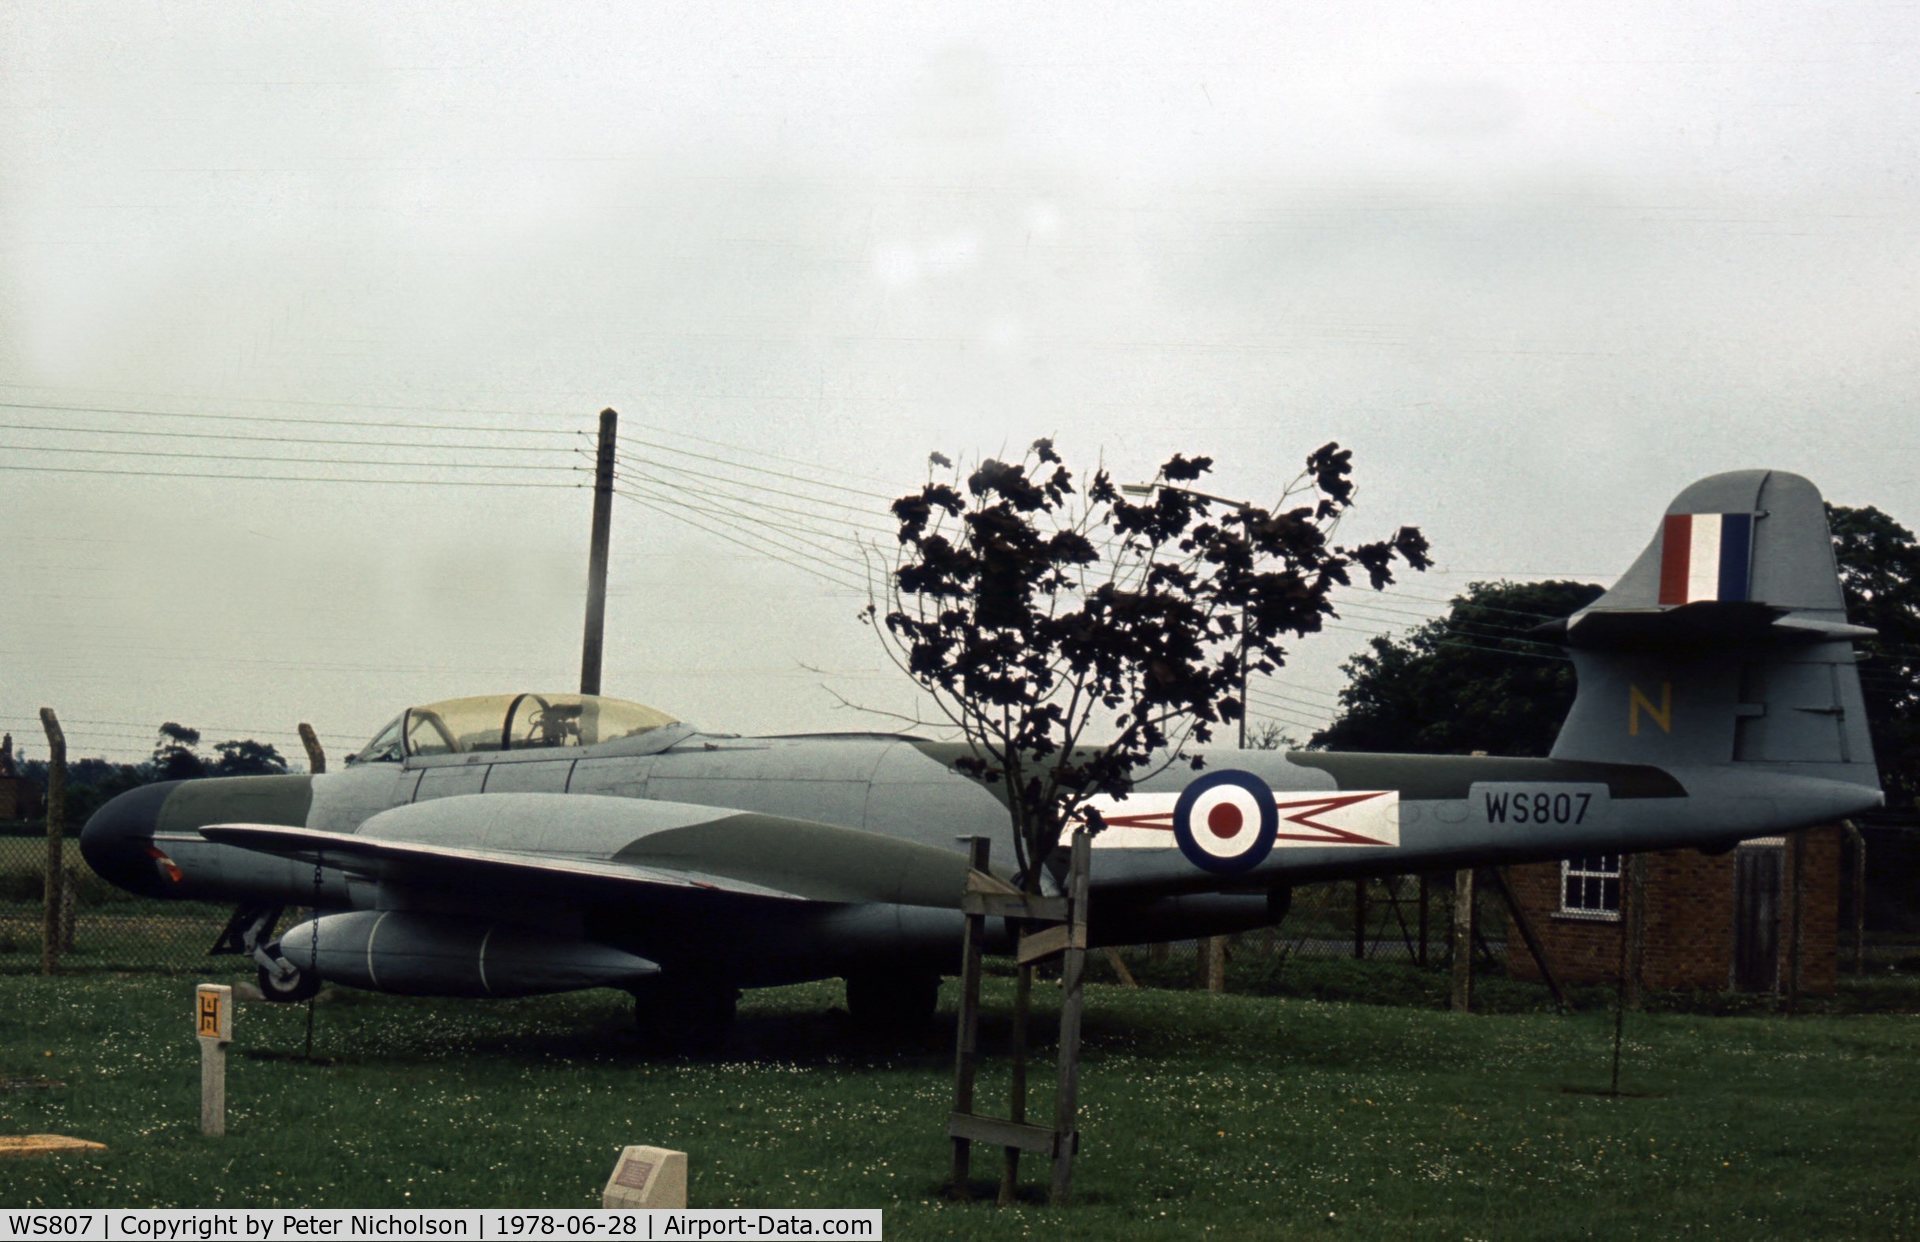 WS807, 1954 Gloster Meteor NF(T).14 C/N Not found WS807, Another view of the gate guardian, in 46 Squadron markings, at RAF Watton in the Summer of 1978.